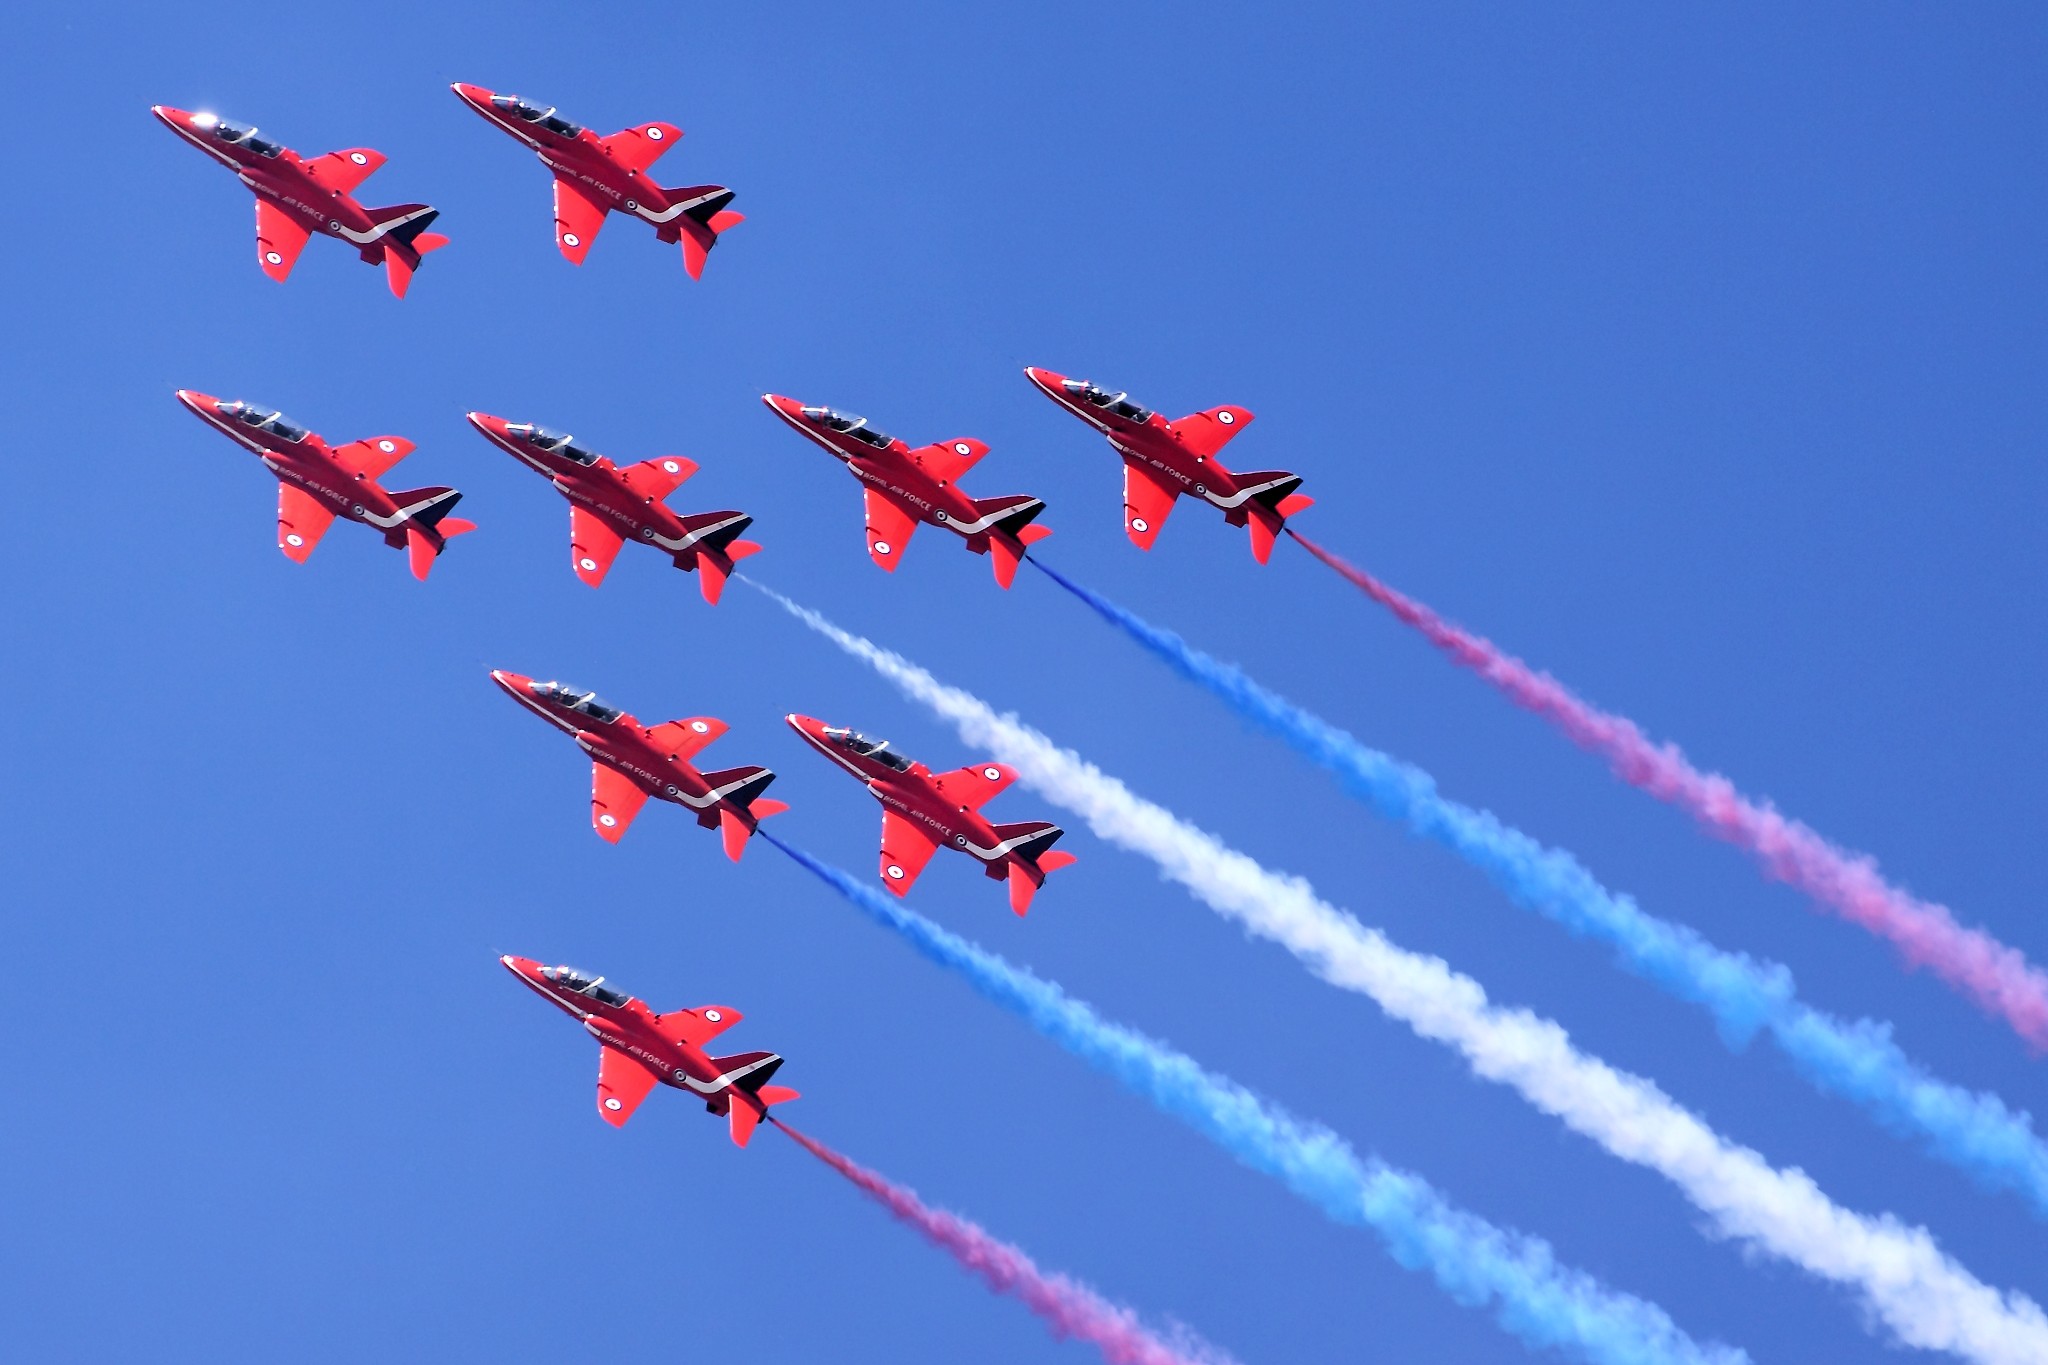 2048x1365 Boats Red Jet Airplane Military Aircraft Ipad 78698 Wallpaper .